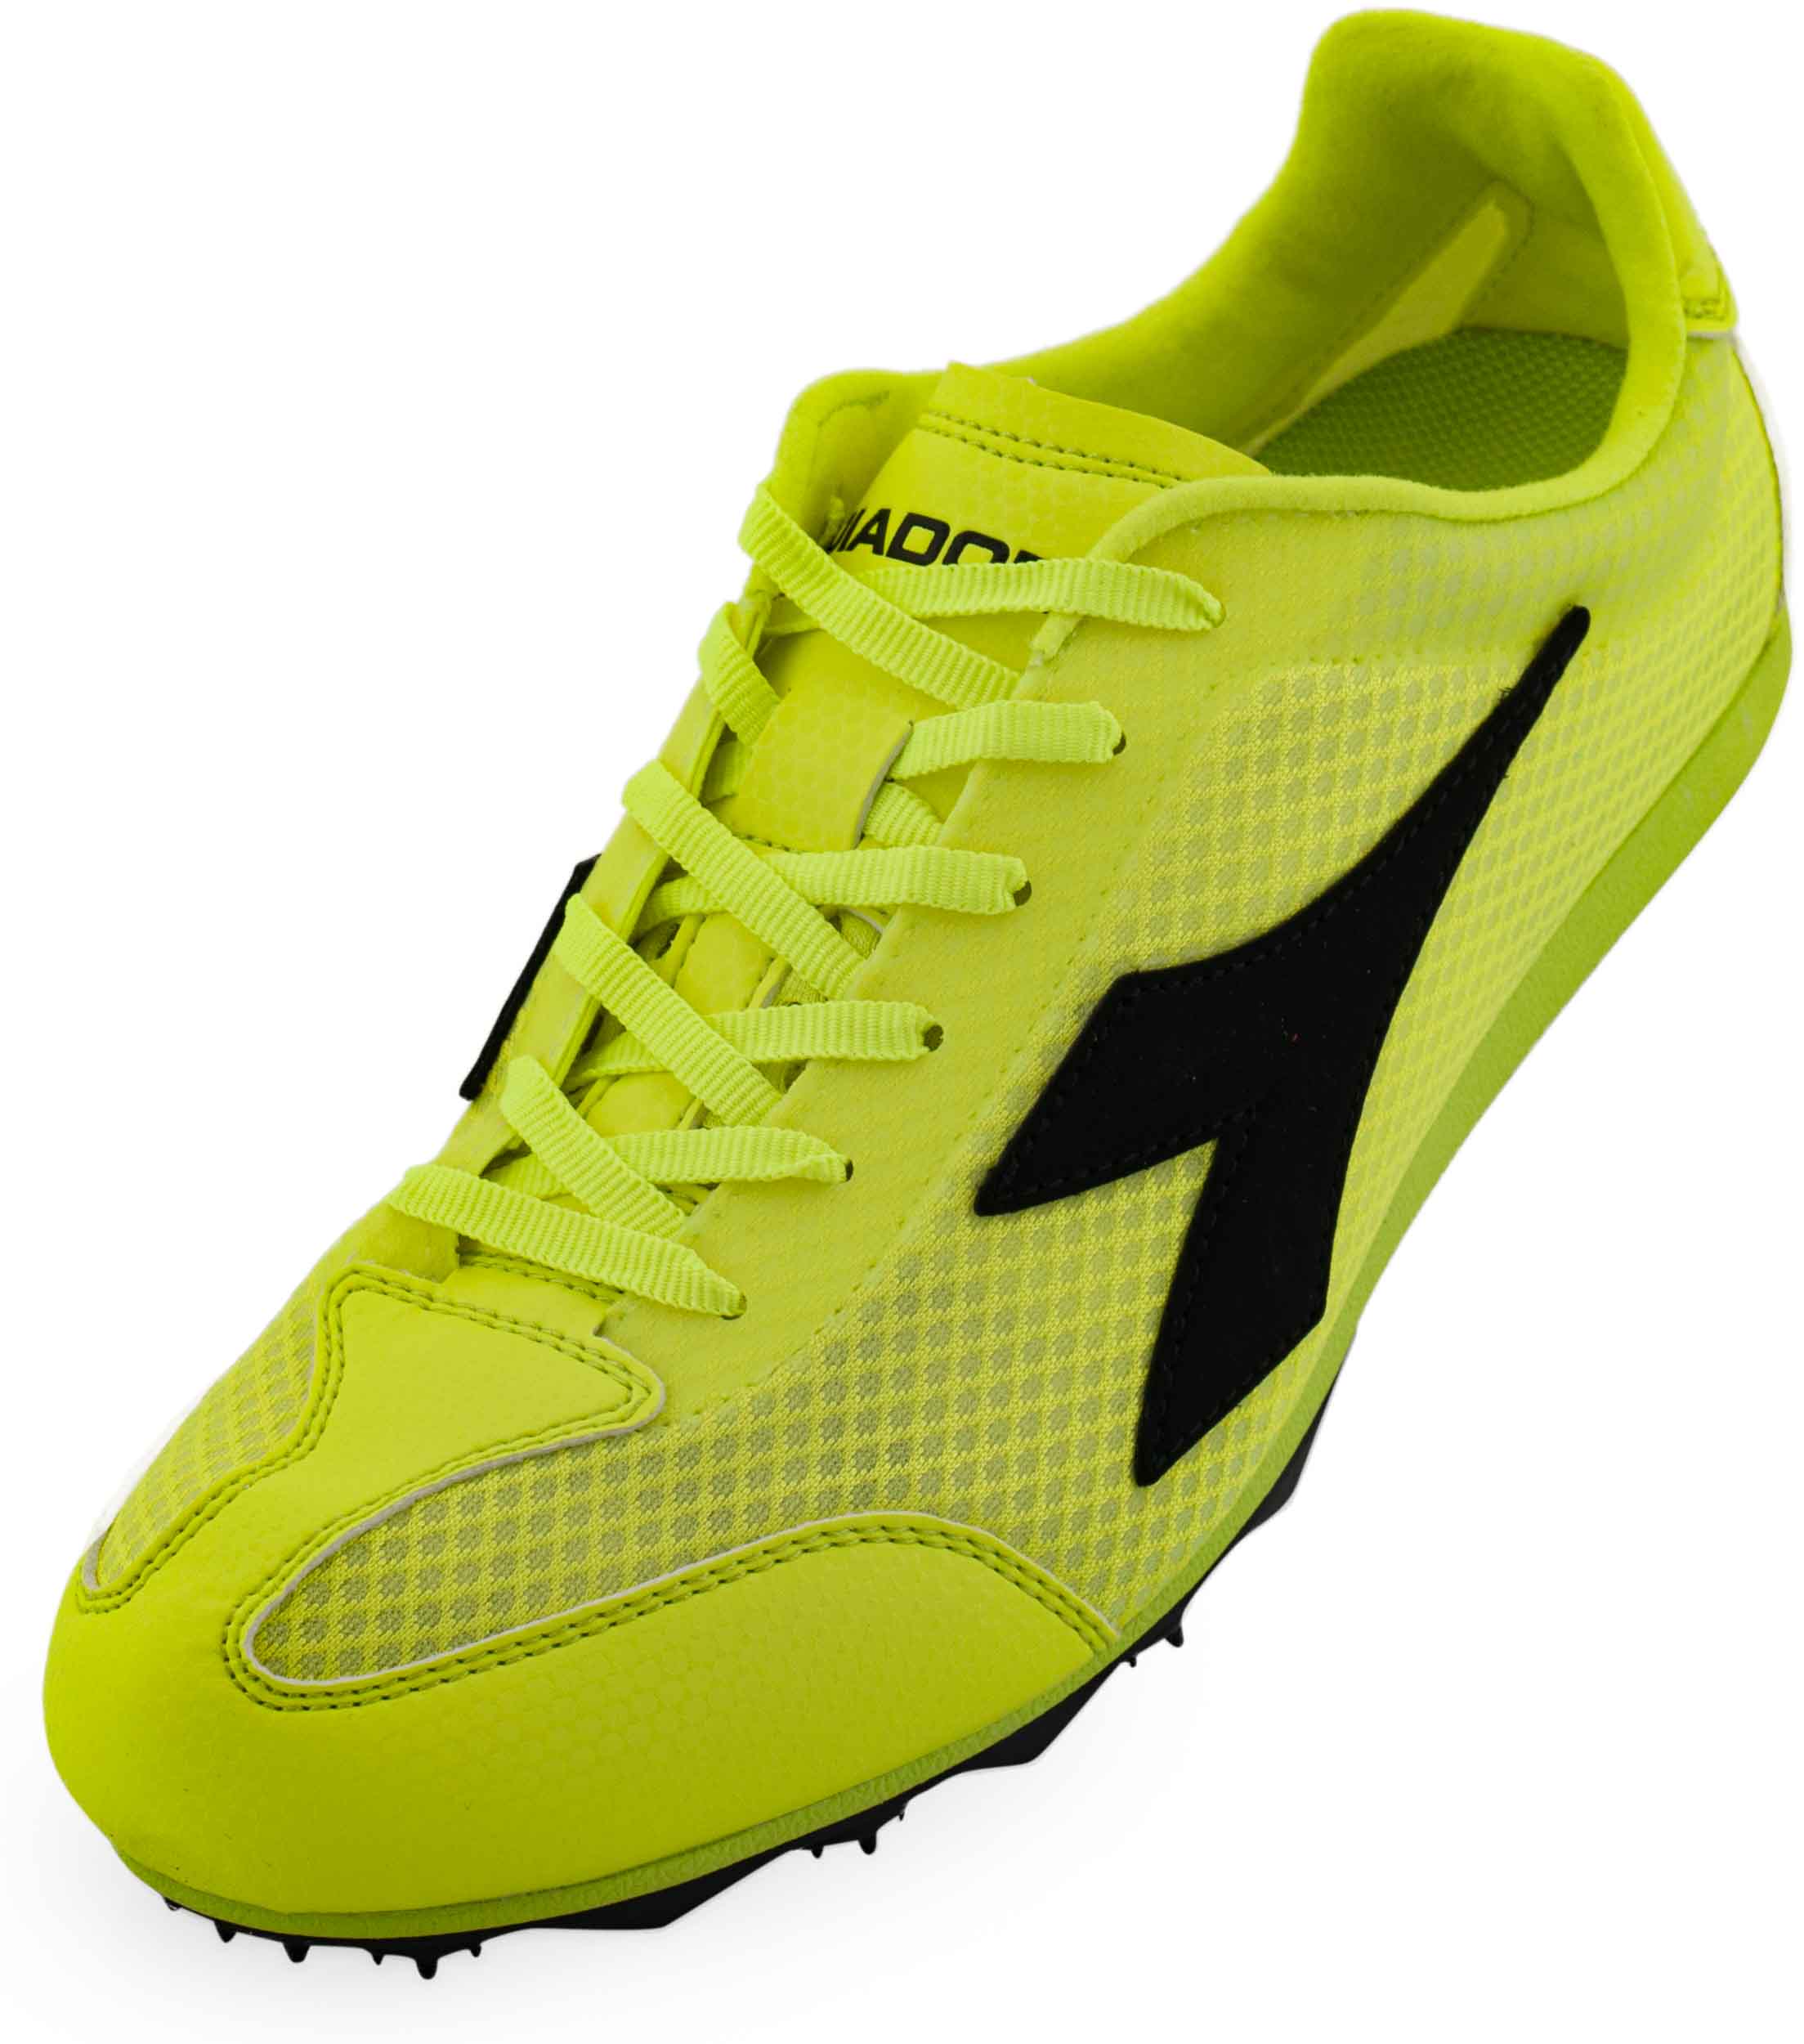 Tretry Diadora Mid Distance Spike Fluo|45